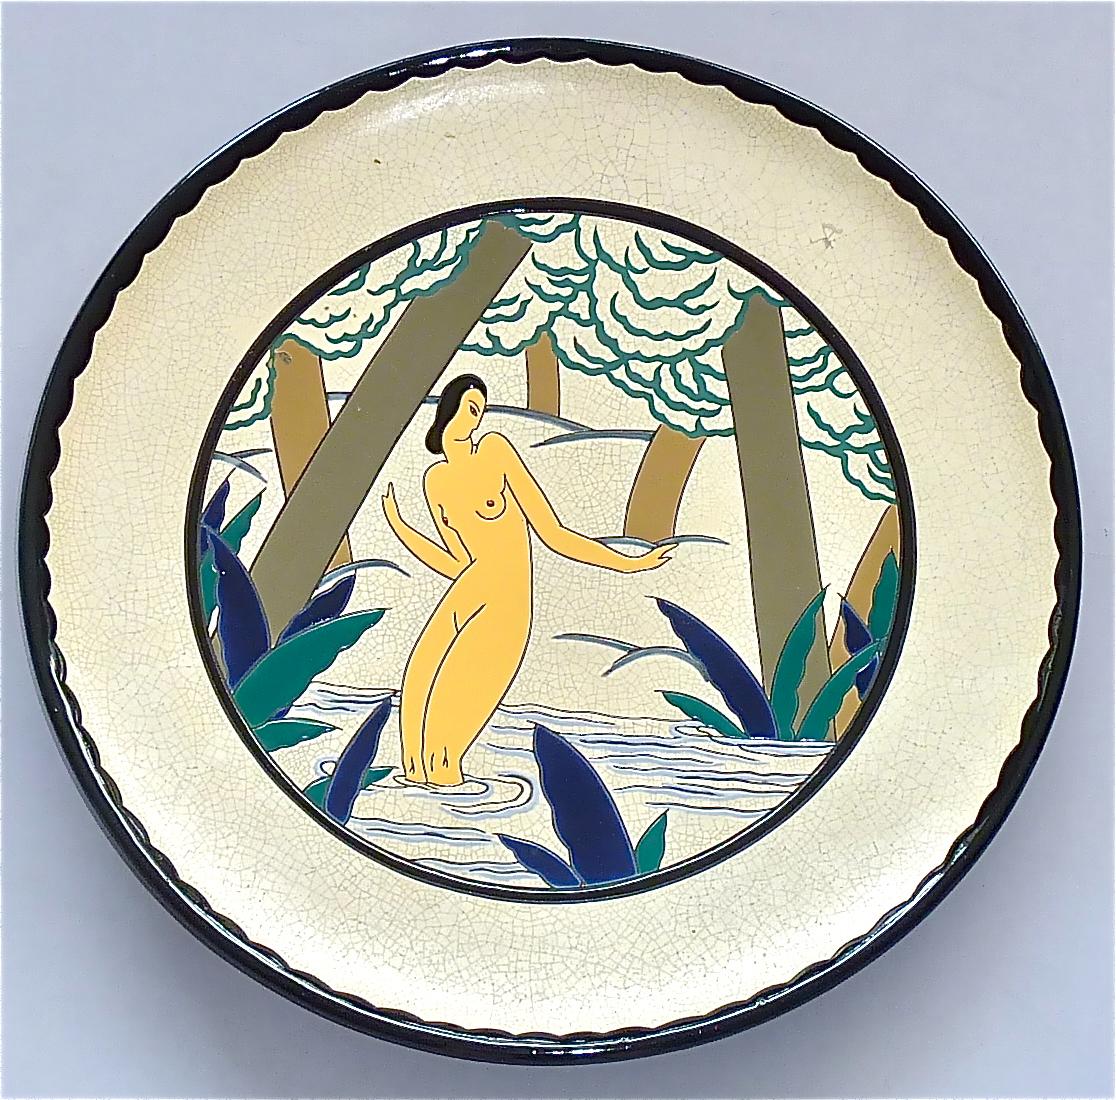 Large amazing Art Deco plate showing a bathing black haired nude in an elegant and typical Art Deco pose. The hand-crafted art ceramic or pottery plate which is made for wall hanging too, has a black rim and frame on a faint ivory color crackled and